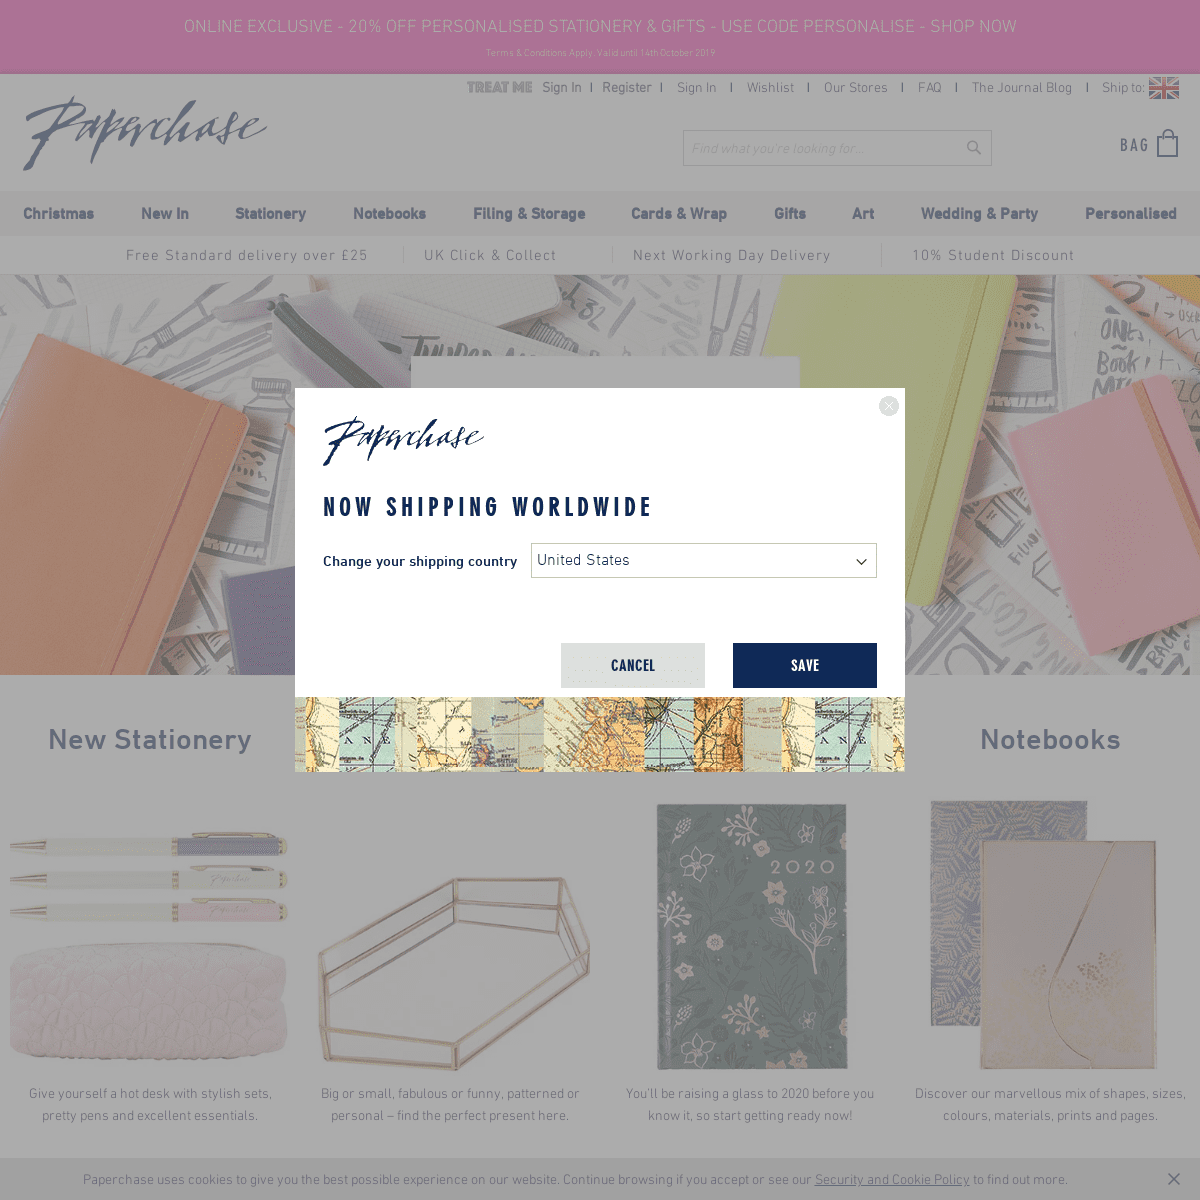 A complete backup of paperchase.co.uk